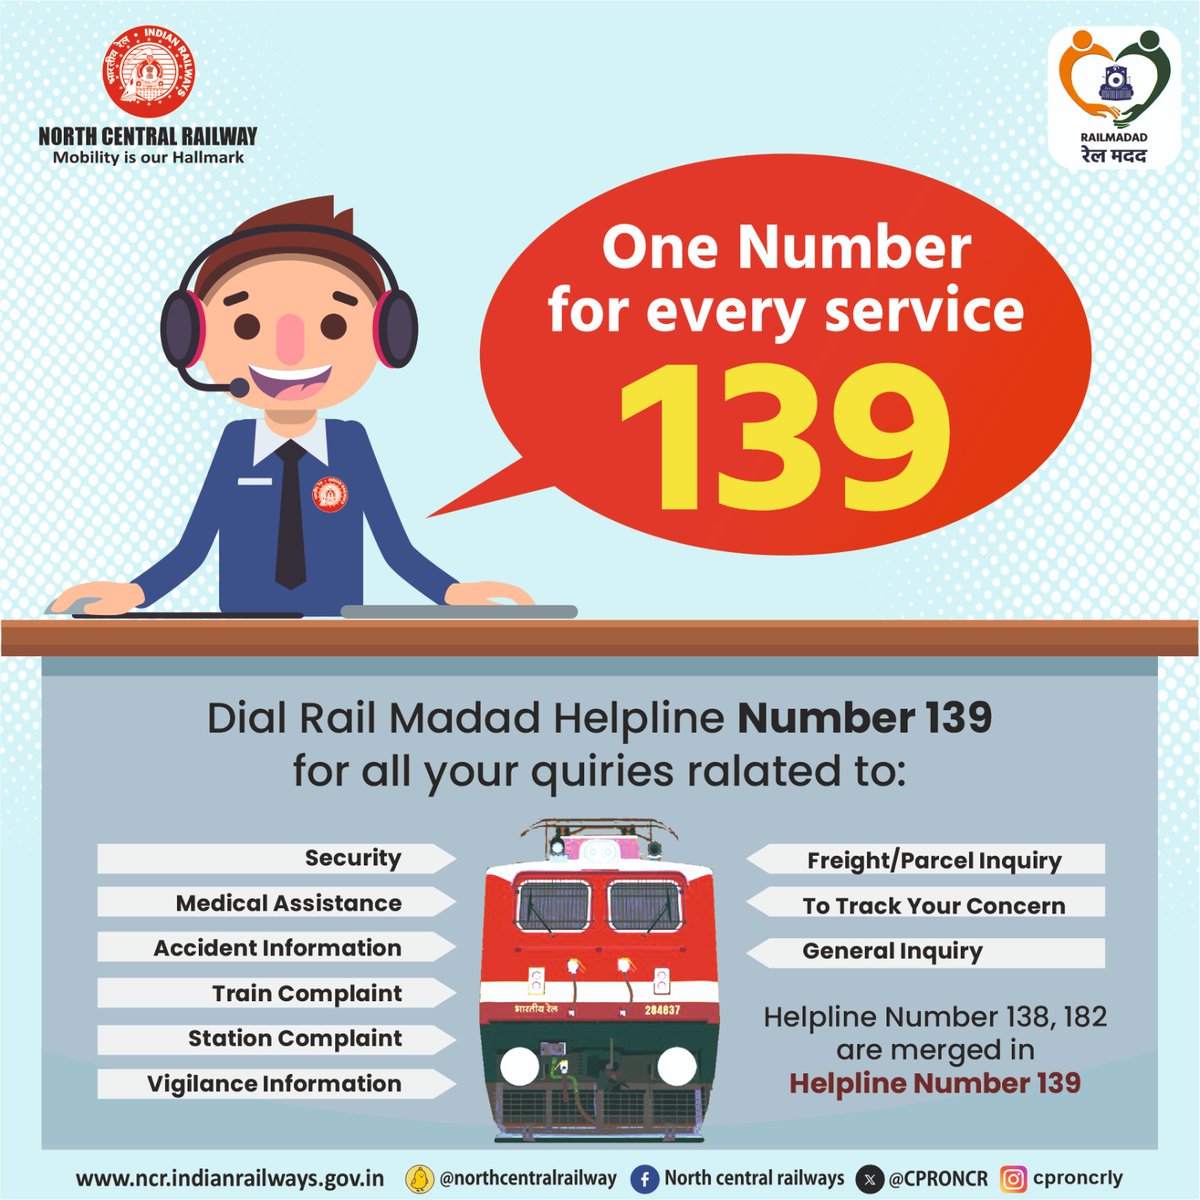 Use Rail Madad App and Integrated Single Helpline number 139 for security, assistance, information, complaint, inquiry or any other concern. #OneRailOneHelpline139
#OneRailOneHelpline139